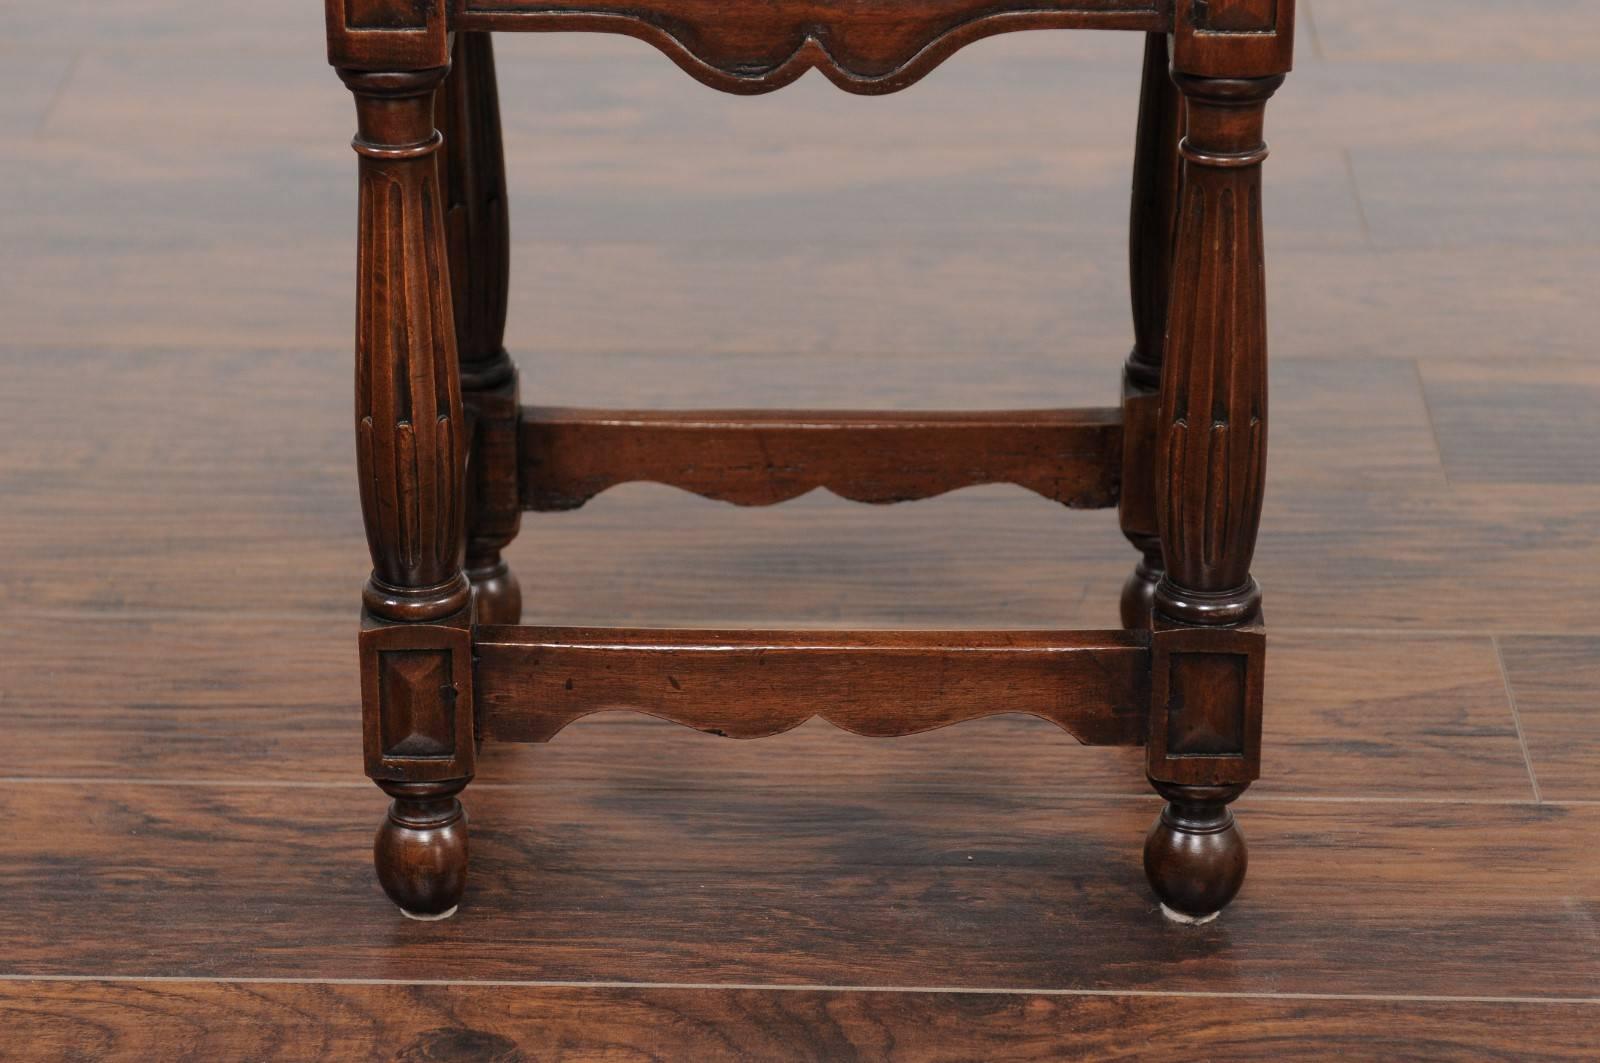 Petite Italian Walnut Side Table with Single Drawer and Fluted Legs, circa 1870 For Sale 5